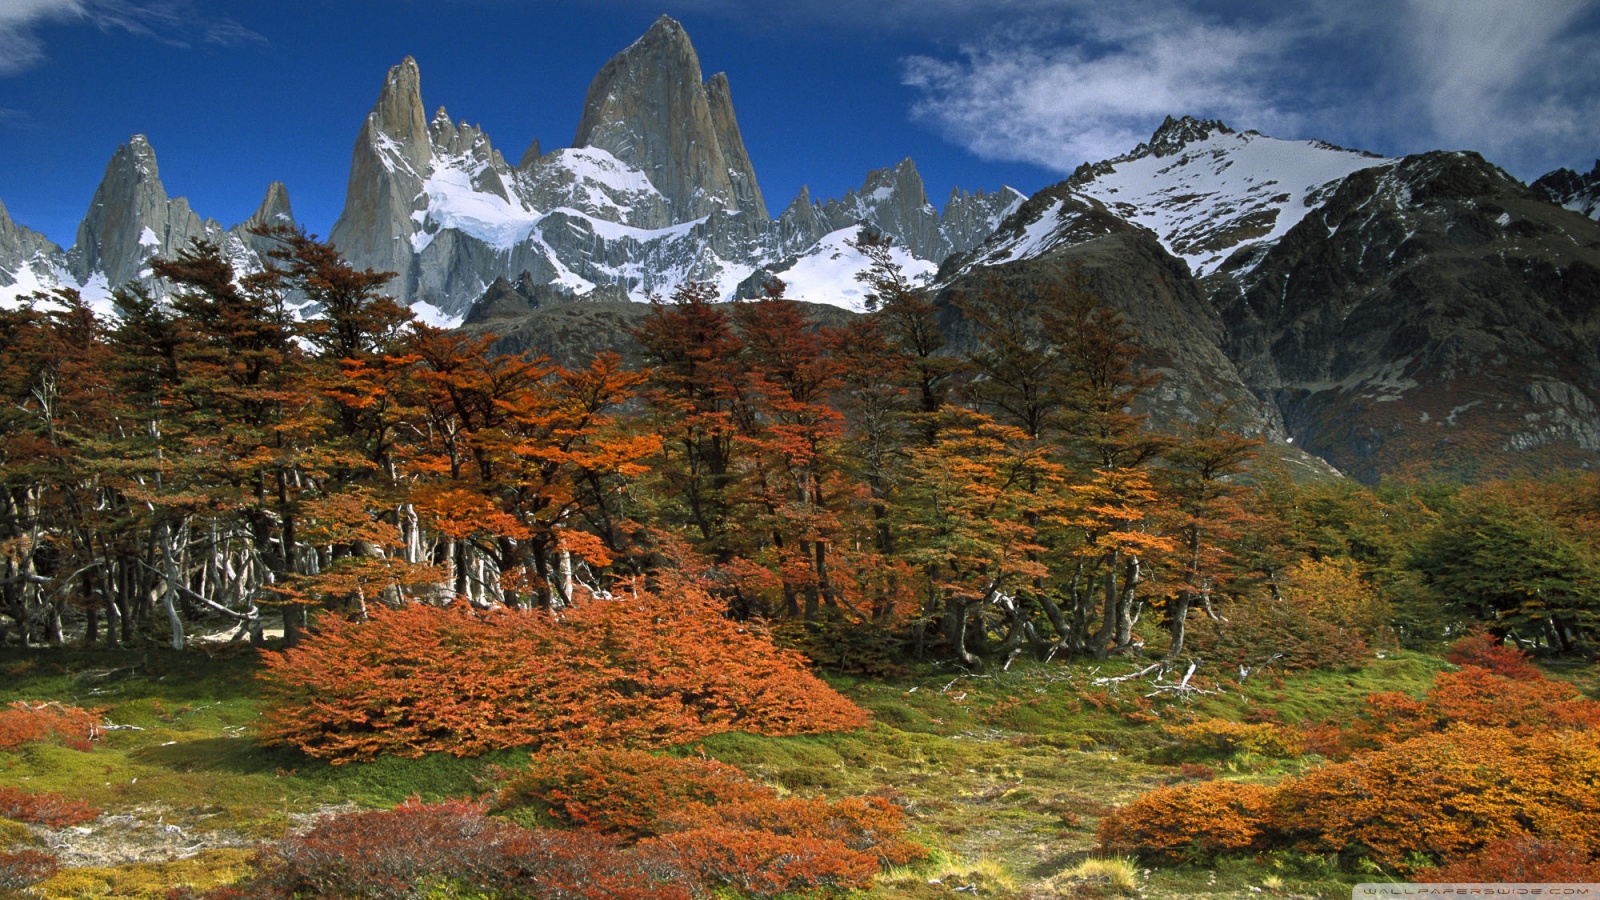 Fitzroy And Beech Trees In Autumn Los Glaciares National Park